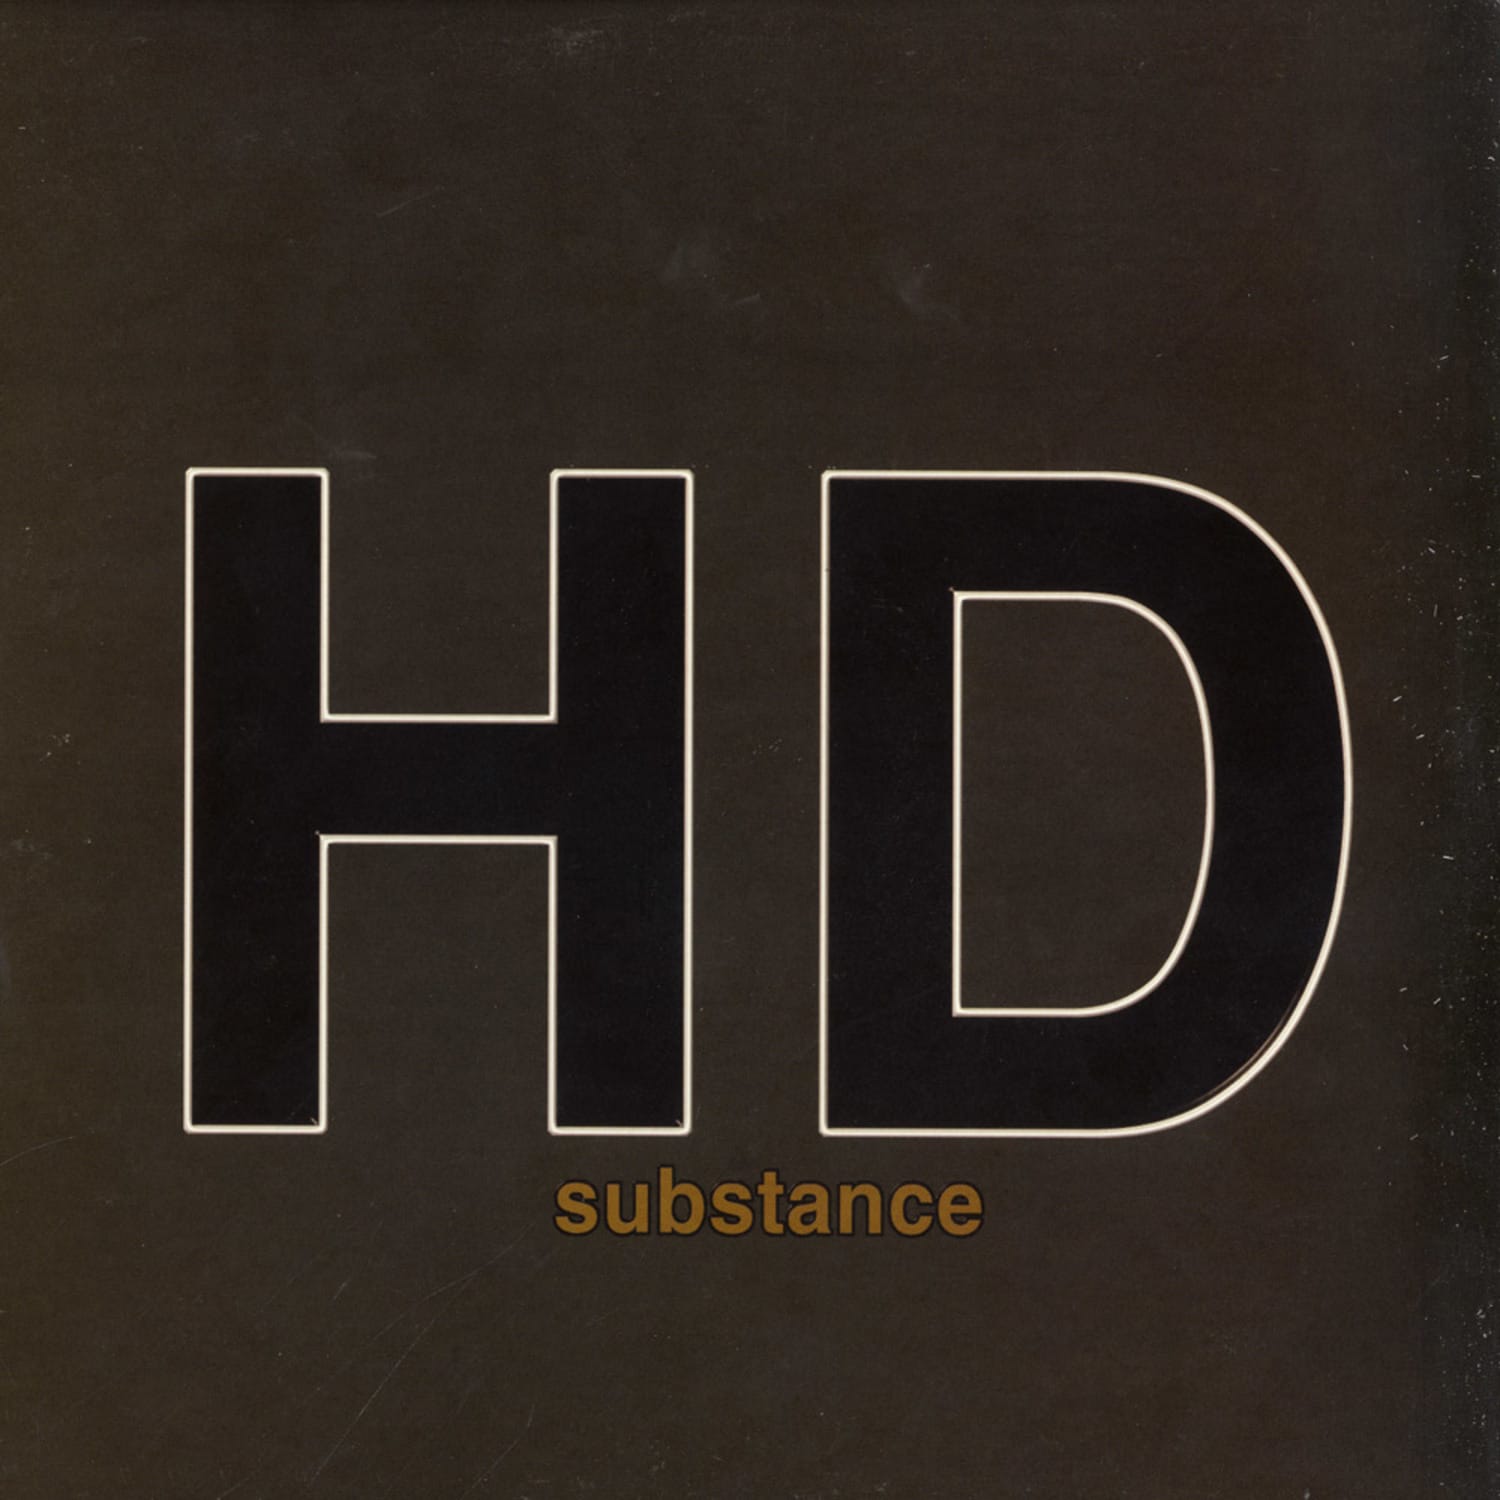 Hd Substance - ELEVEN 